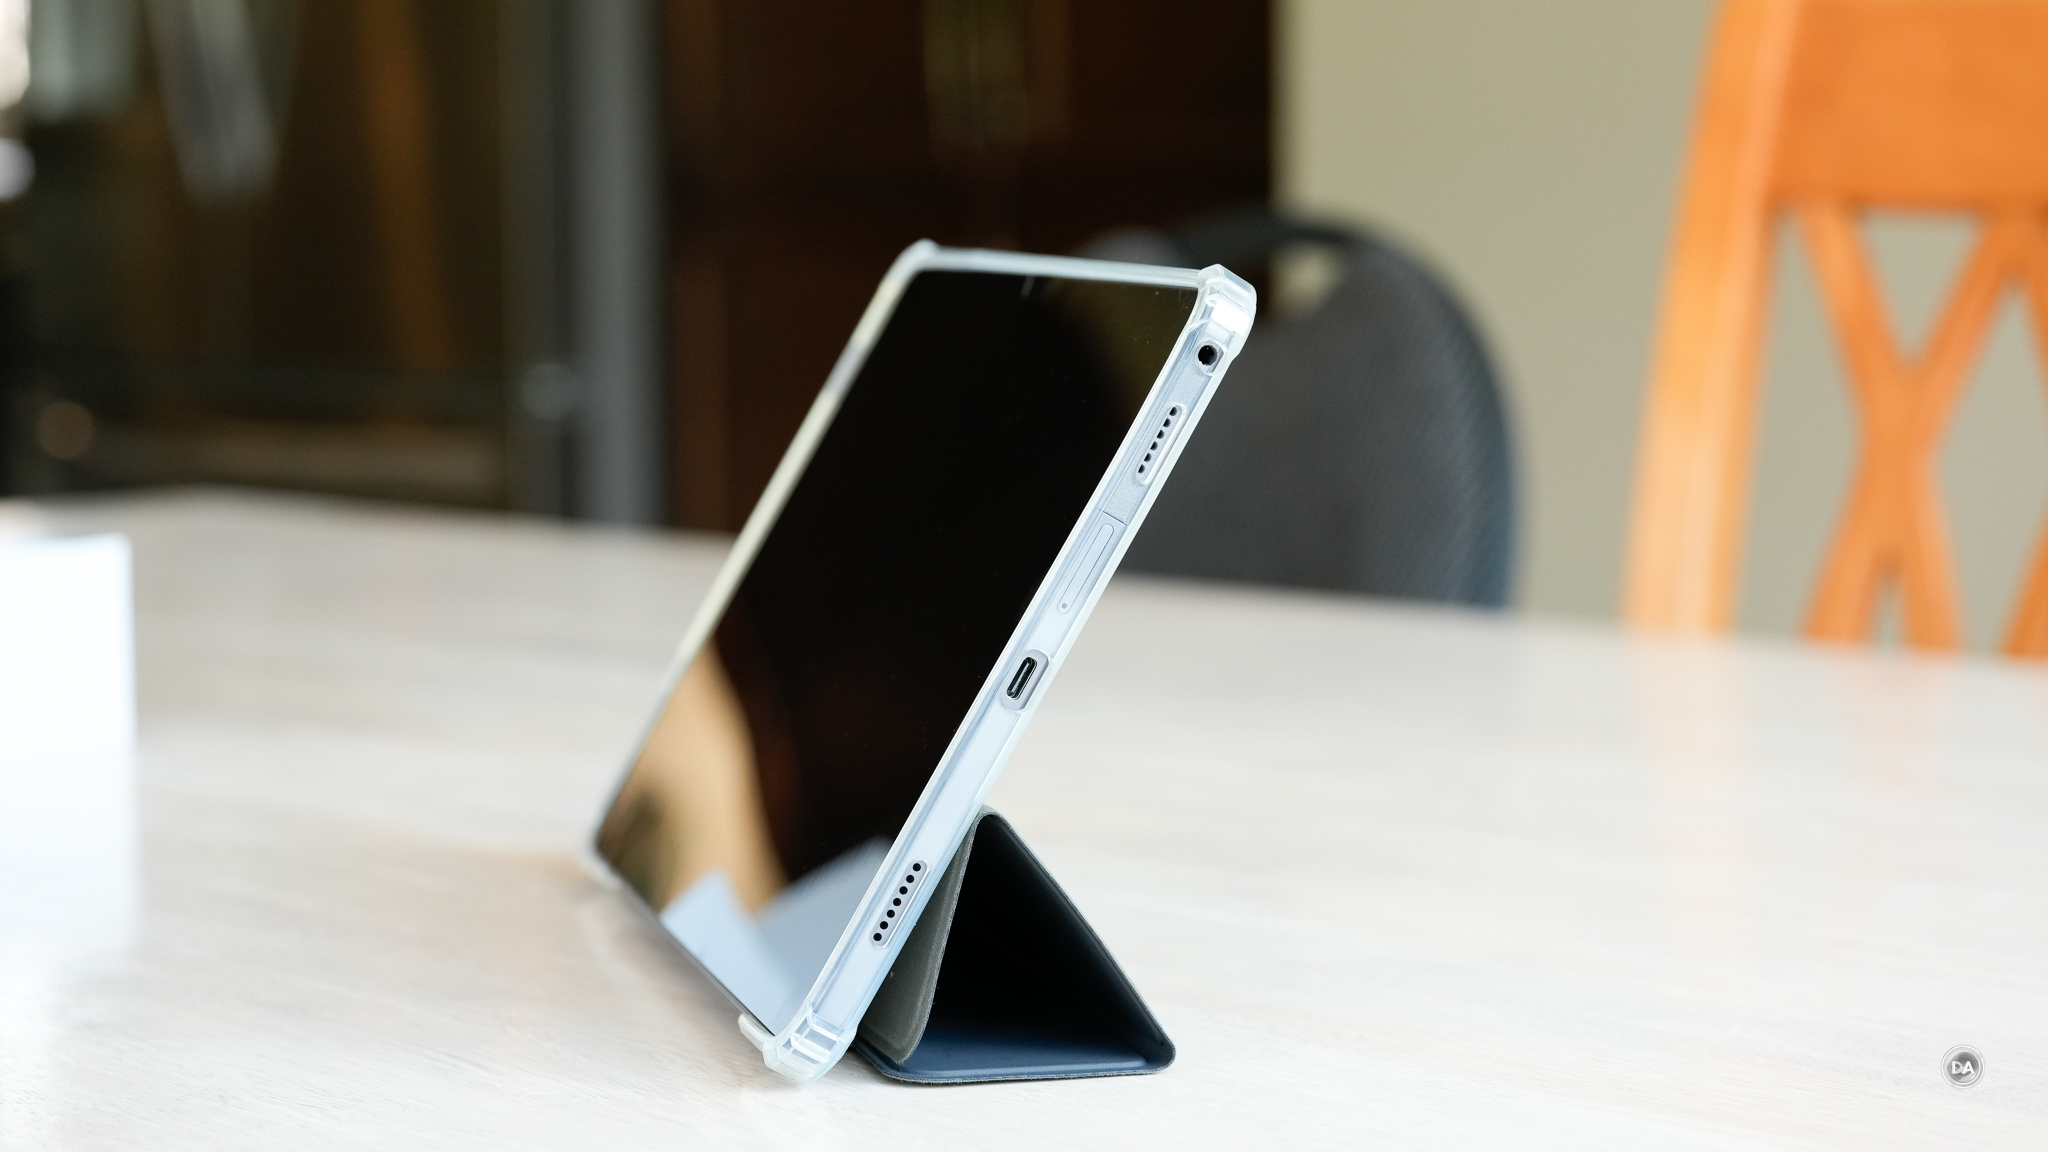 Doogee T30 Pro 11 Tablet Review 